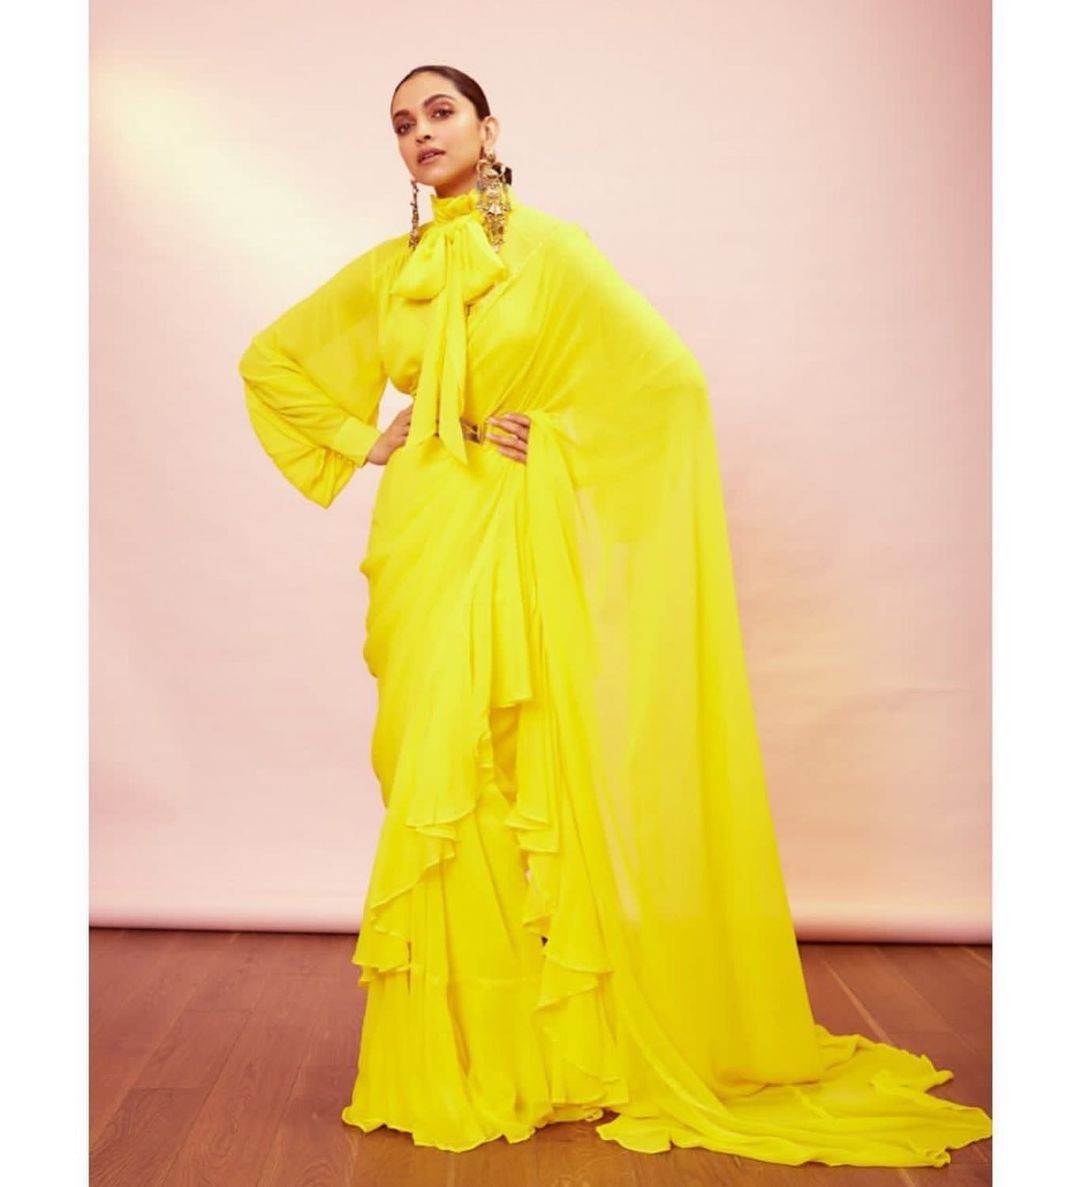 Deepika Padukone goes vibrant in the frilly yellow saree. 